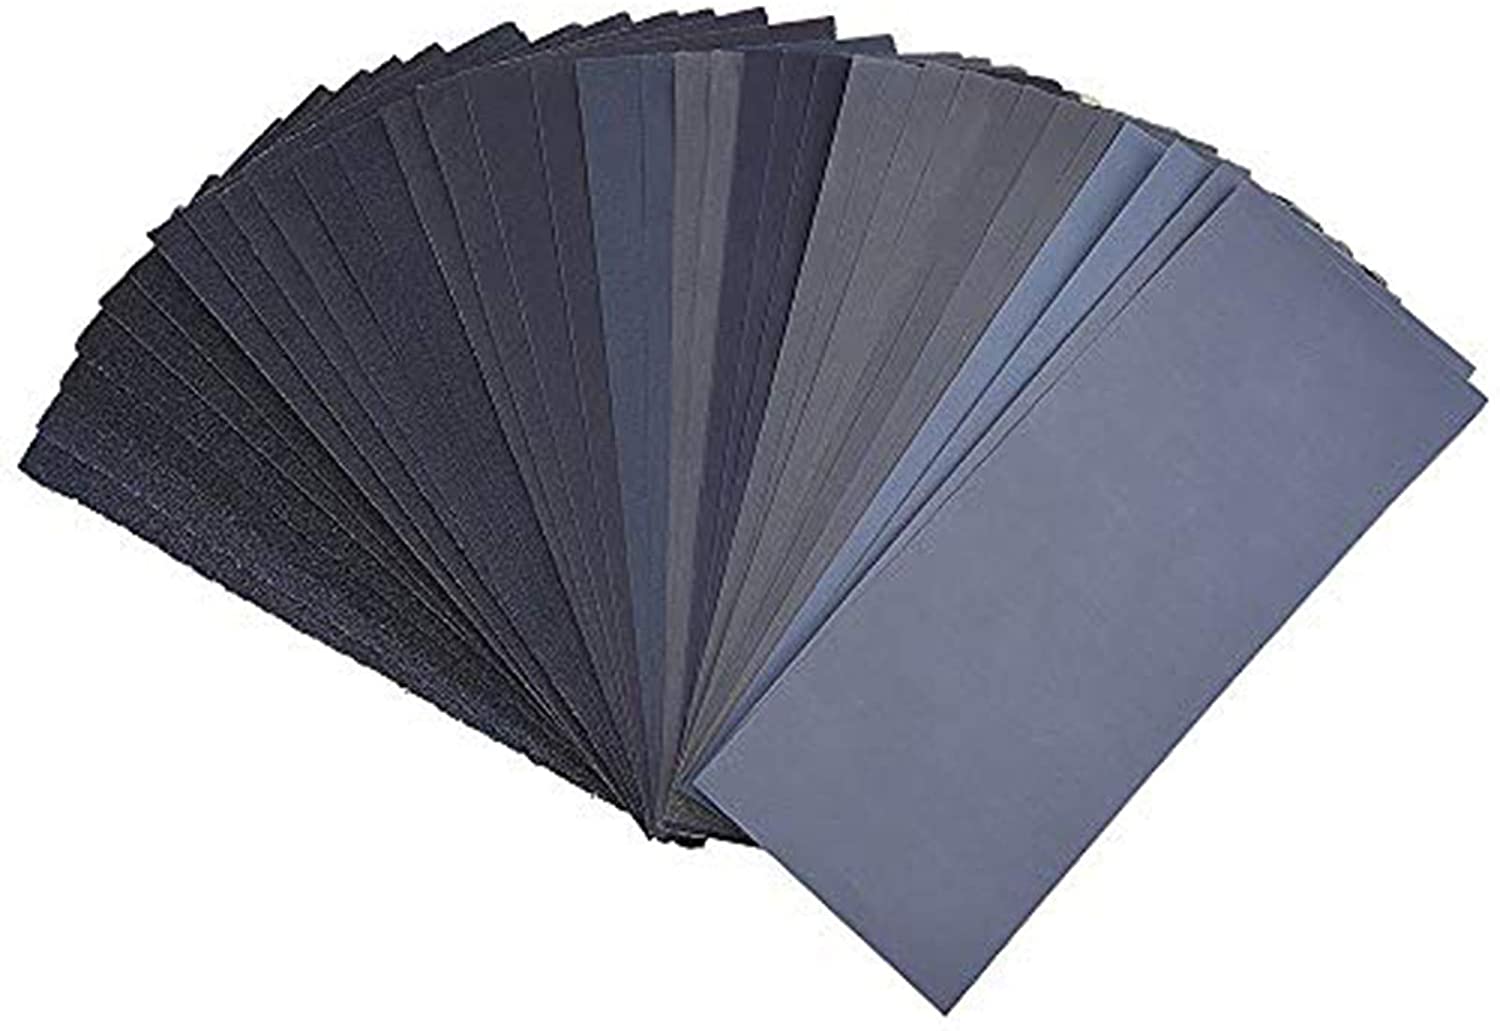 Miady 120 to 3000 Assorted Grit Sandpaper